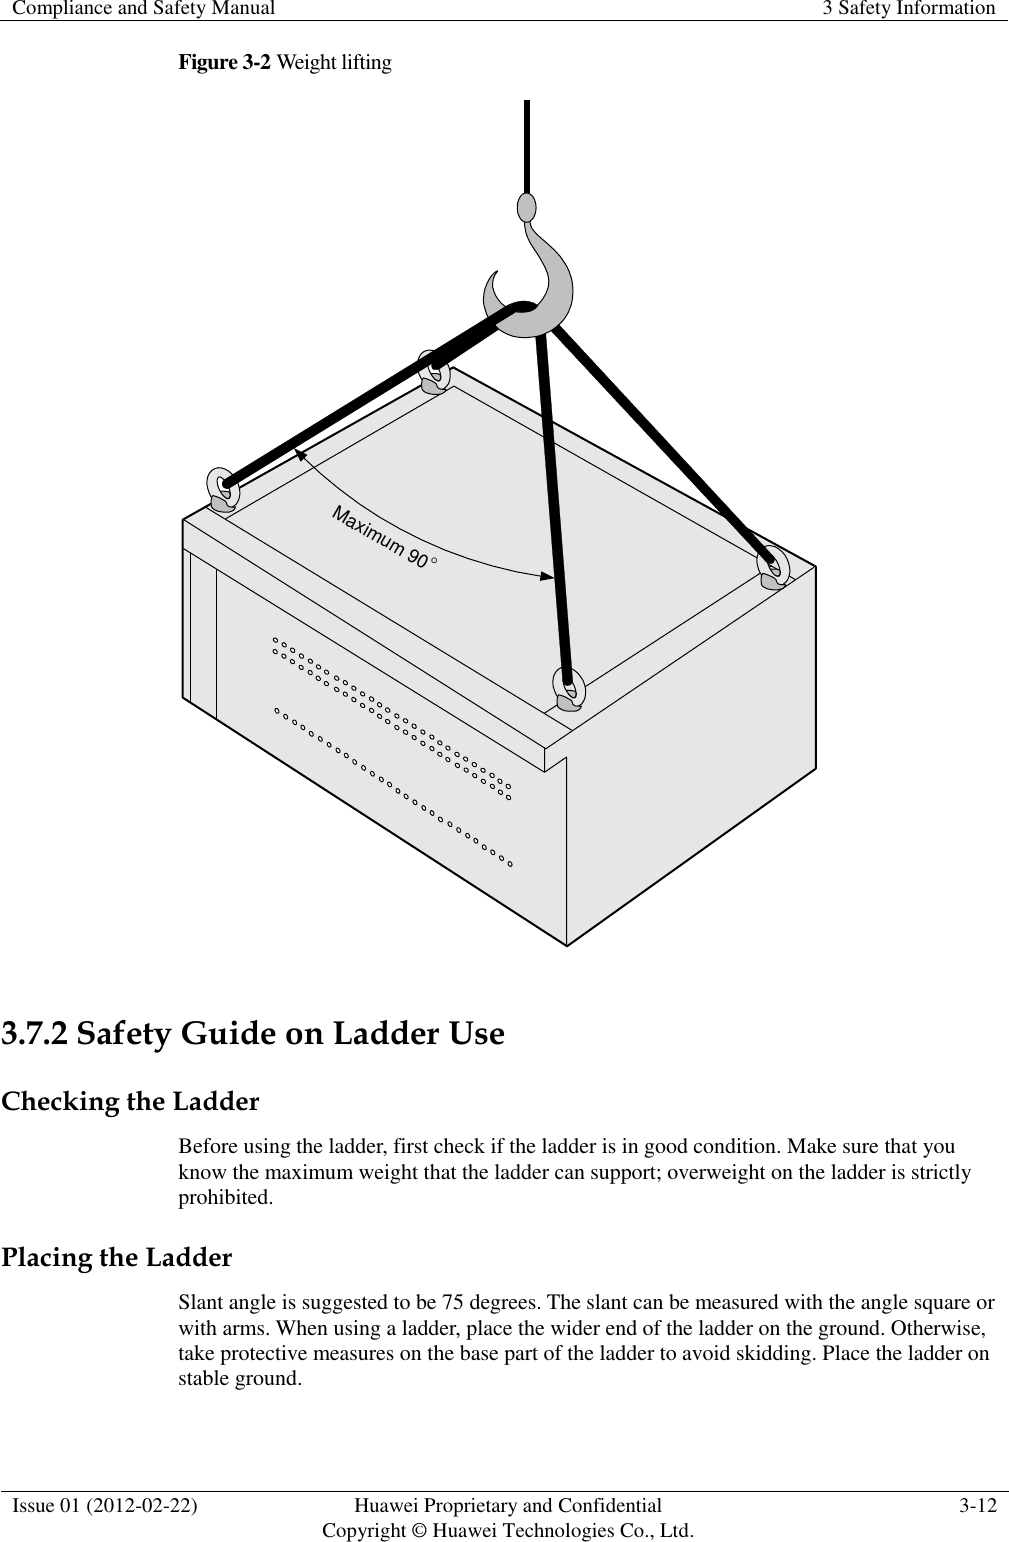 Compliance and Safety Manual 3 Safety Information  Issue 01 (2012-02-22) Huawei Proprietary and Confidential           Copyright © Huawei Technologies Co., Ltd. 3-12  Figure 3-2 Weight lifting Maximum 90  3.7.2 Safety Guide on Ladder Use Checking the Ladder Before using the ladder, first check if the ladder is in good condition. Make sure that you know the maximum weight that the ladder can support; overweight on the ladder is strictly prohibited. Placing the Ladder Slant angle is suggested to be 75 degrees. The slant can be measured with the angle square or with arms. When using a ladder, place the wider end of the ladder on the ground. Otherwise, take protective measures on the base part of the ladder to avoid skidding. Place the ladder on stable ground. 